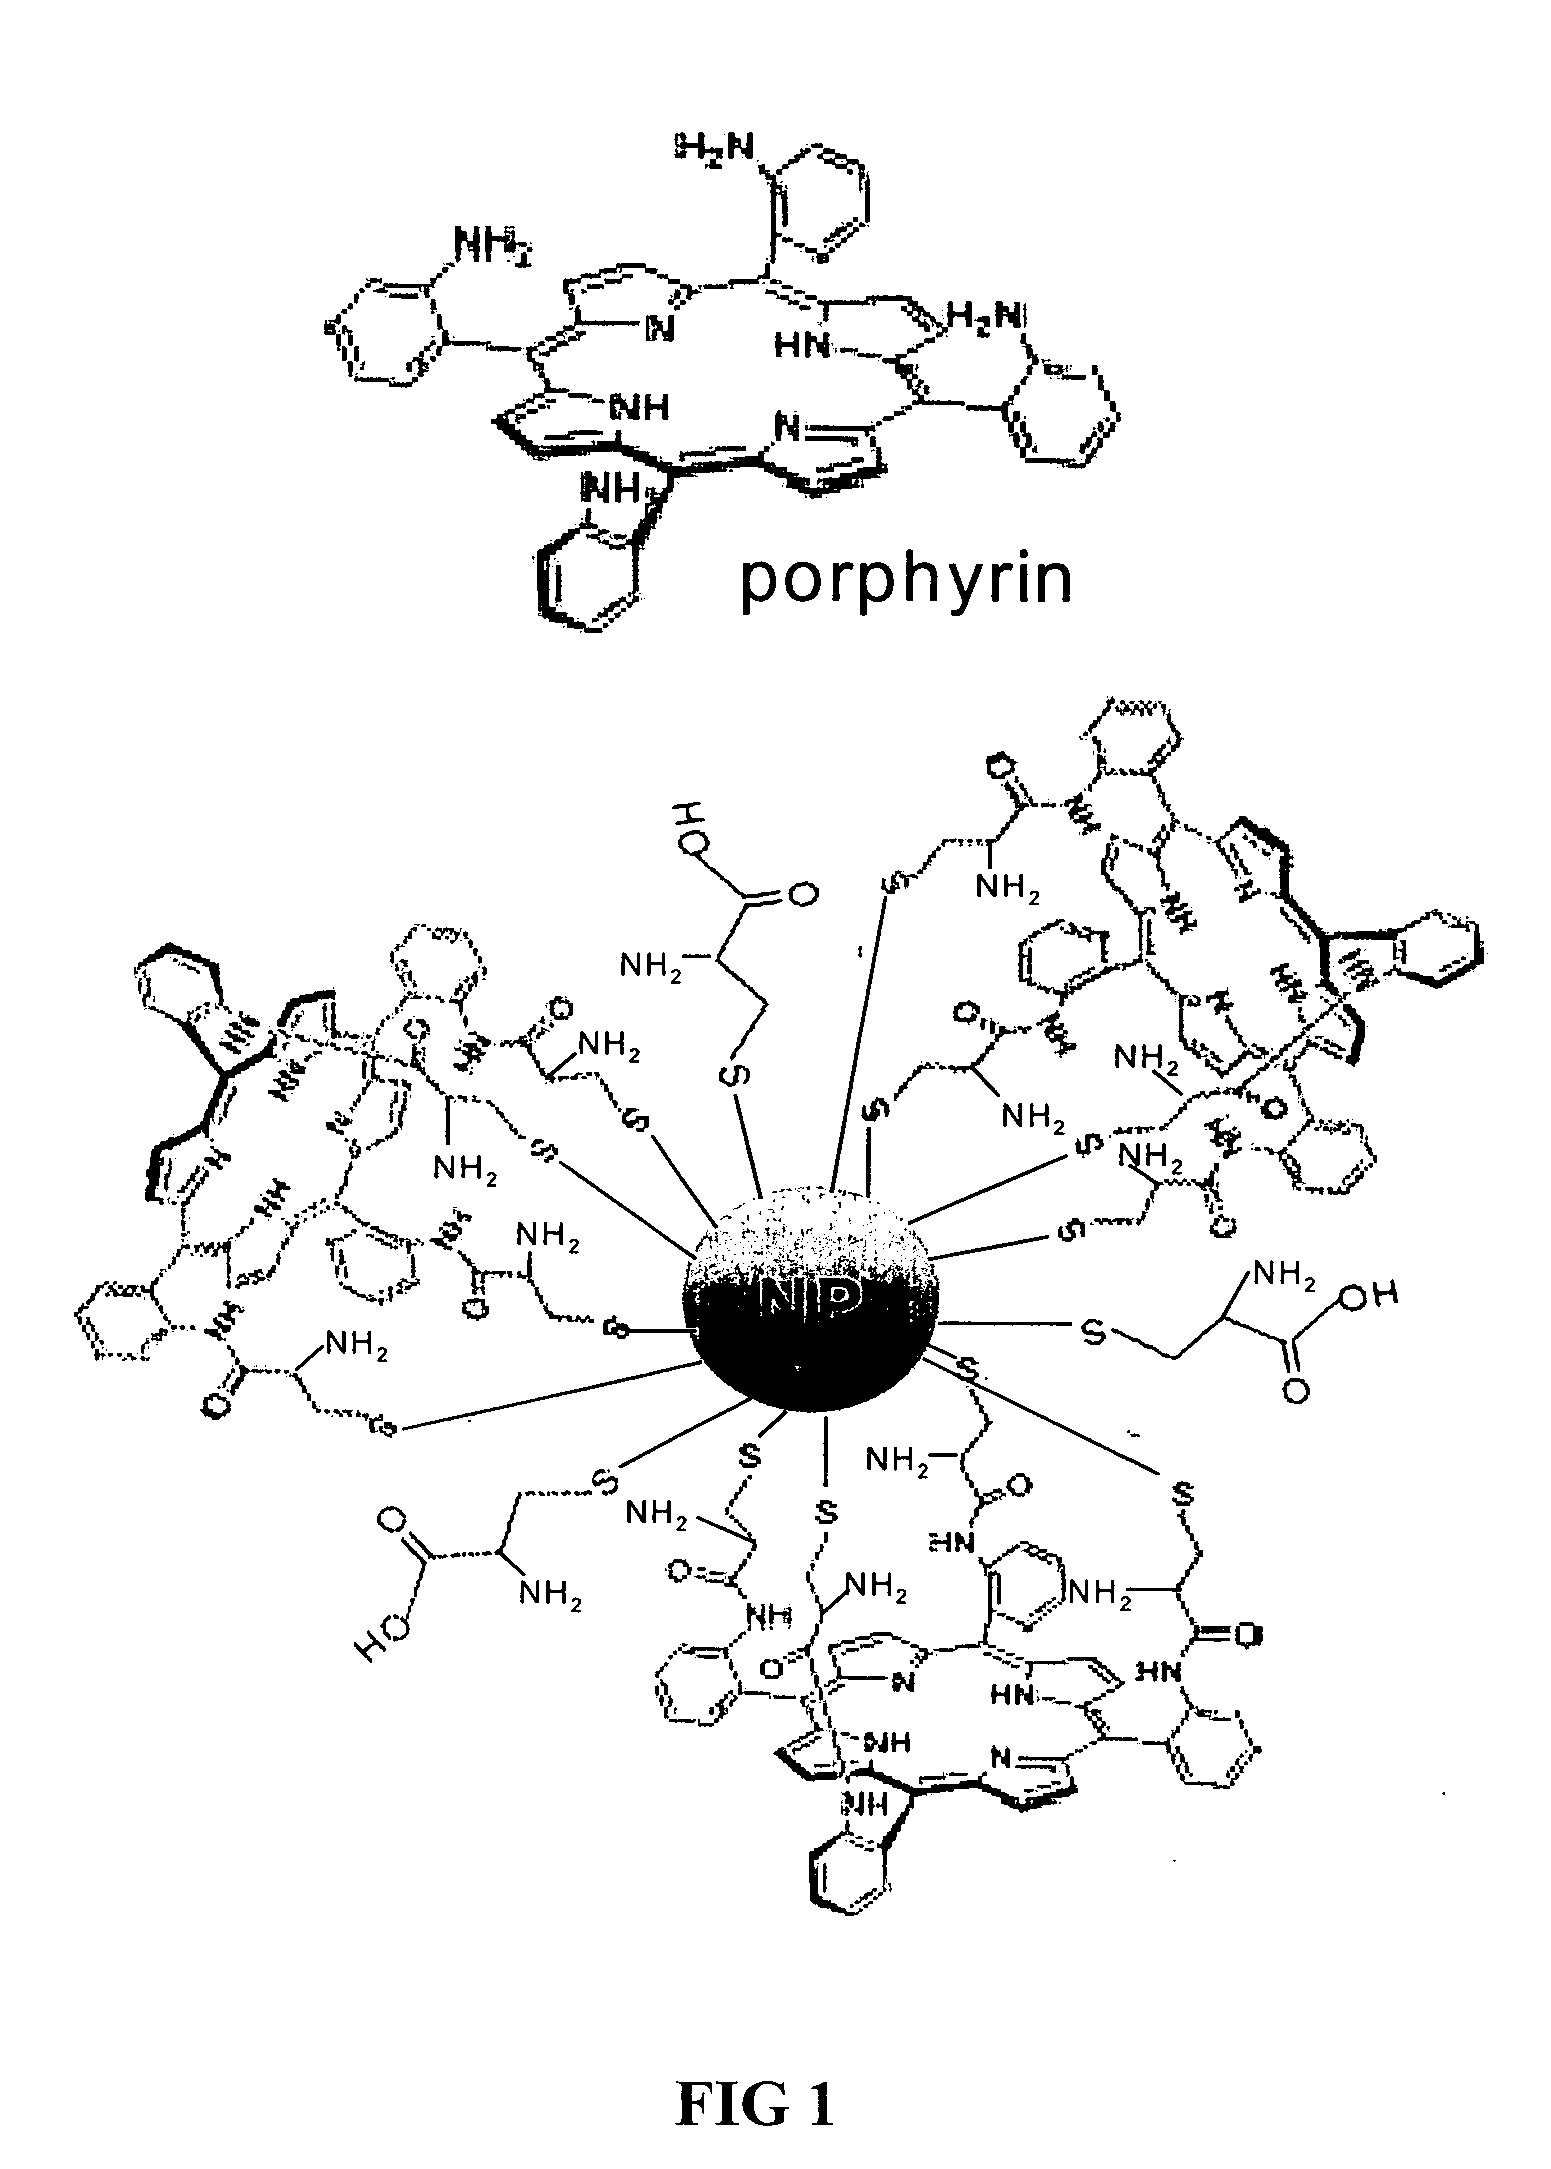 Nanoparticle based photodynamic therapy and methods of making and using same